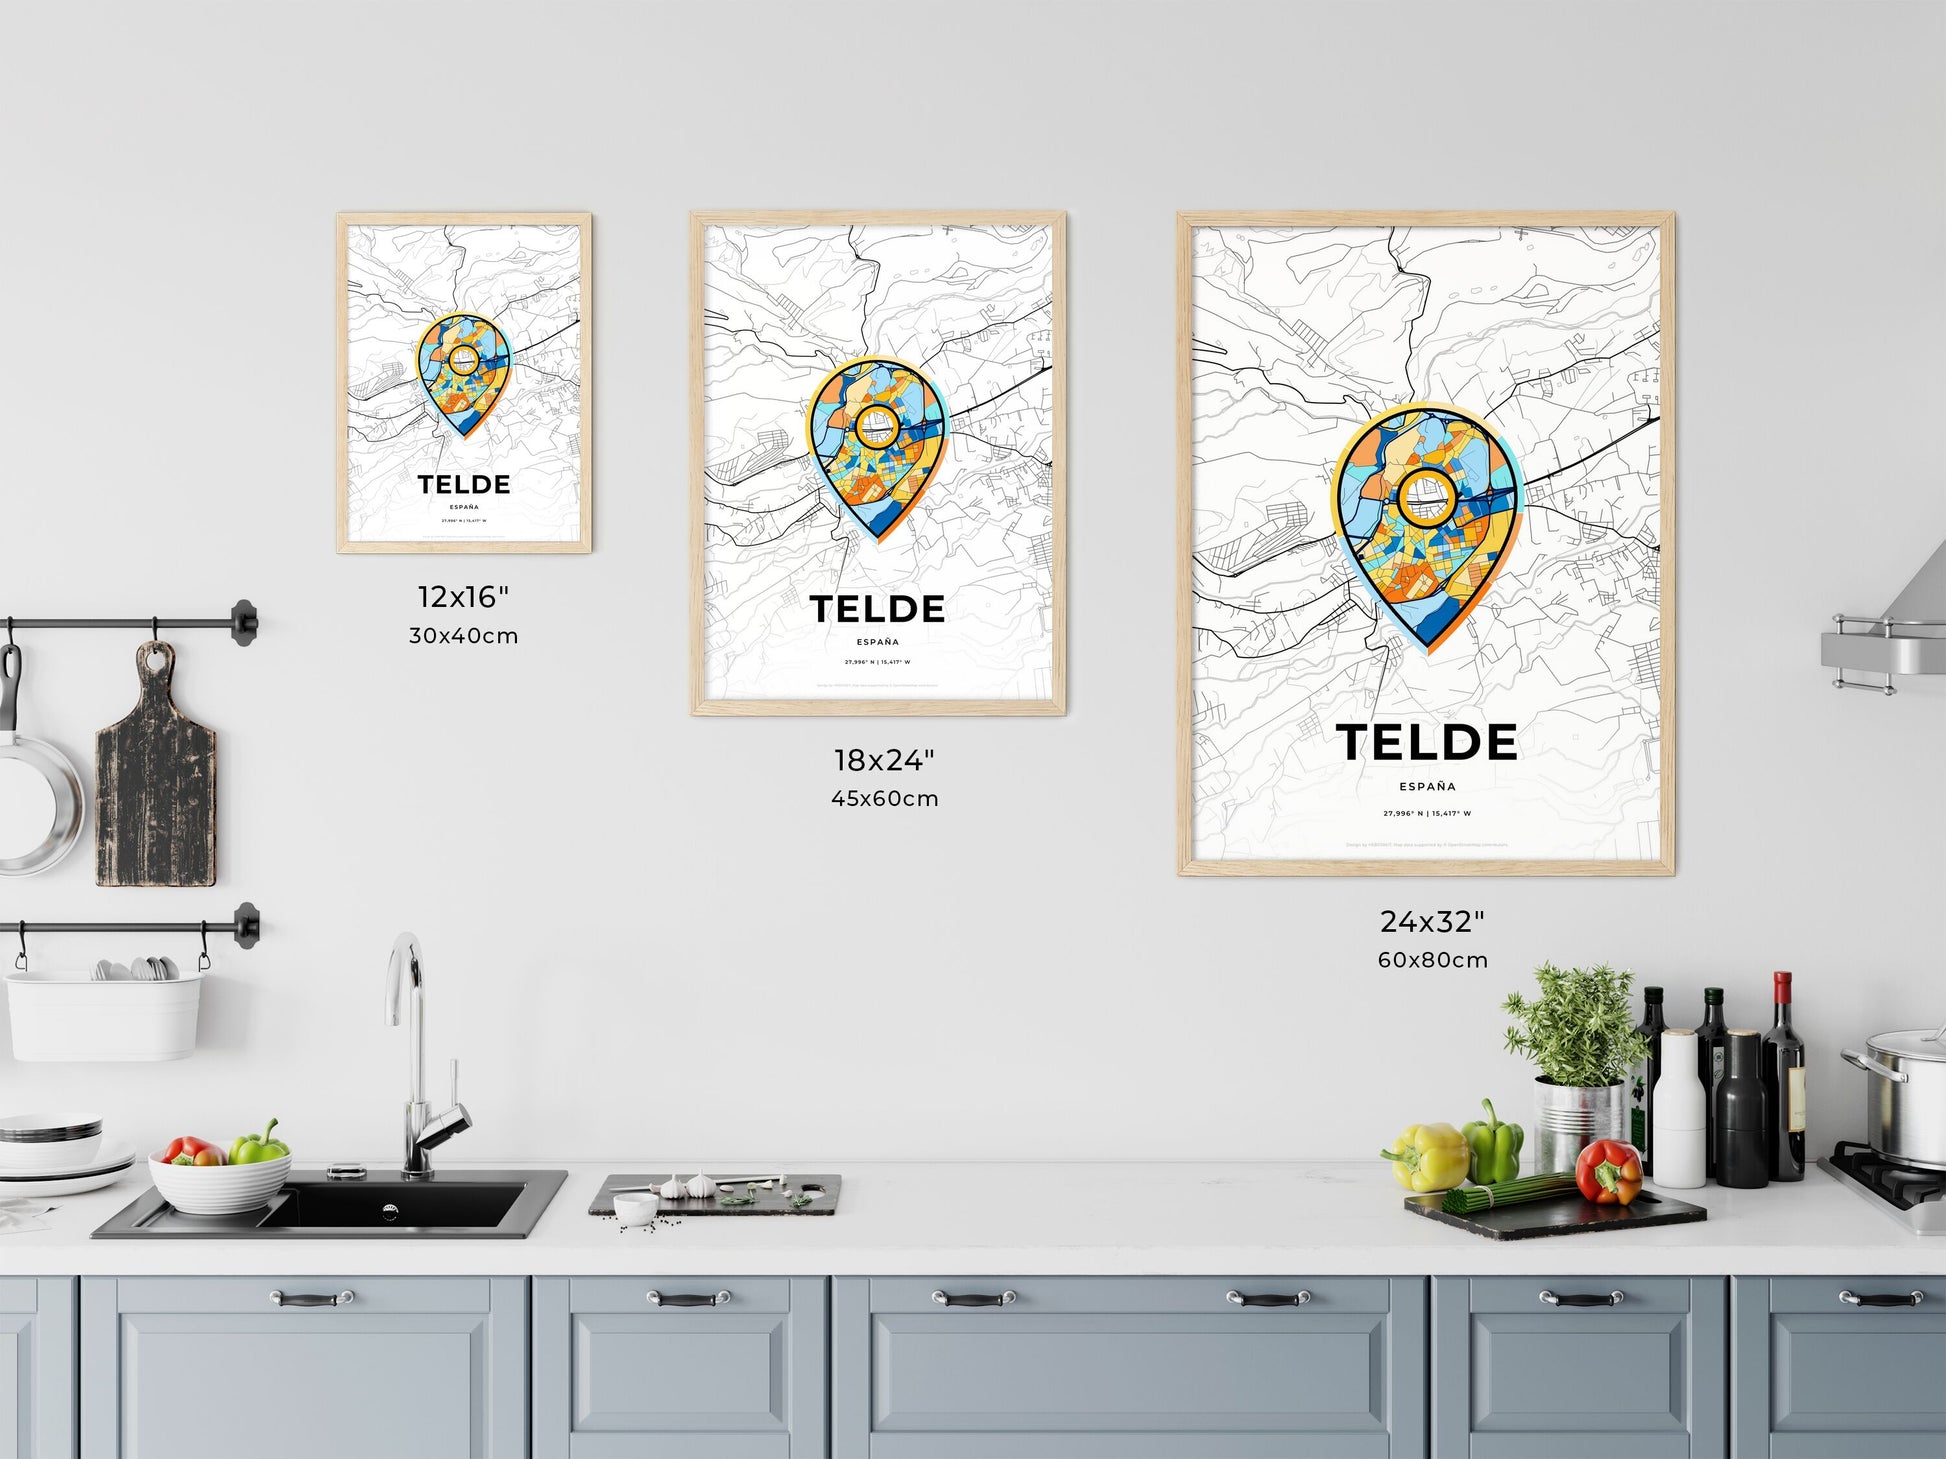 TELDE SPAIN minimal art map with a colorful icon. Where it all began, Couple map gift.